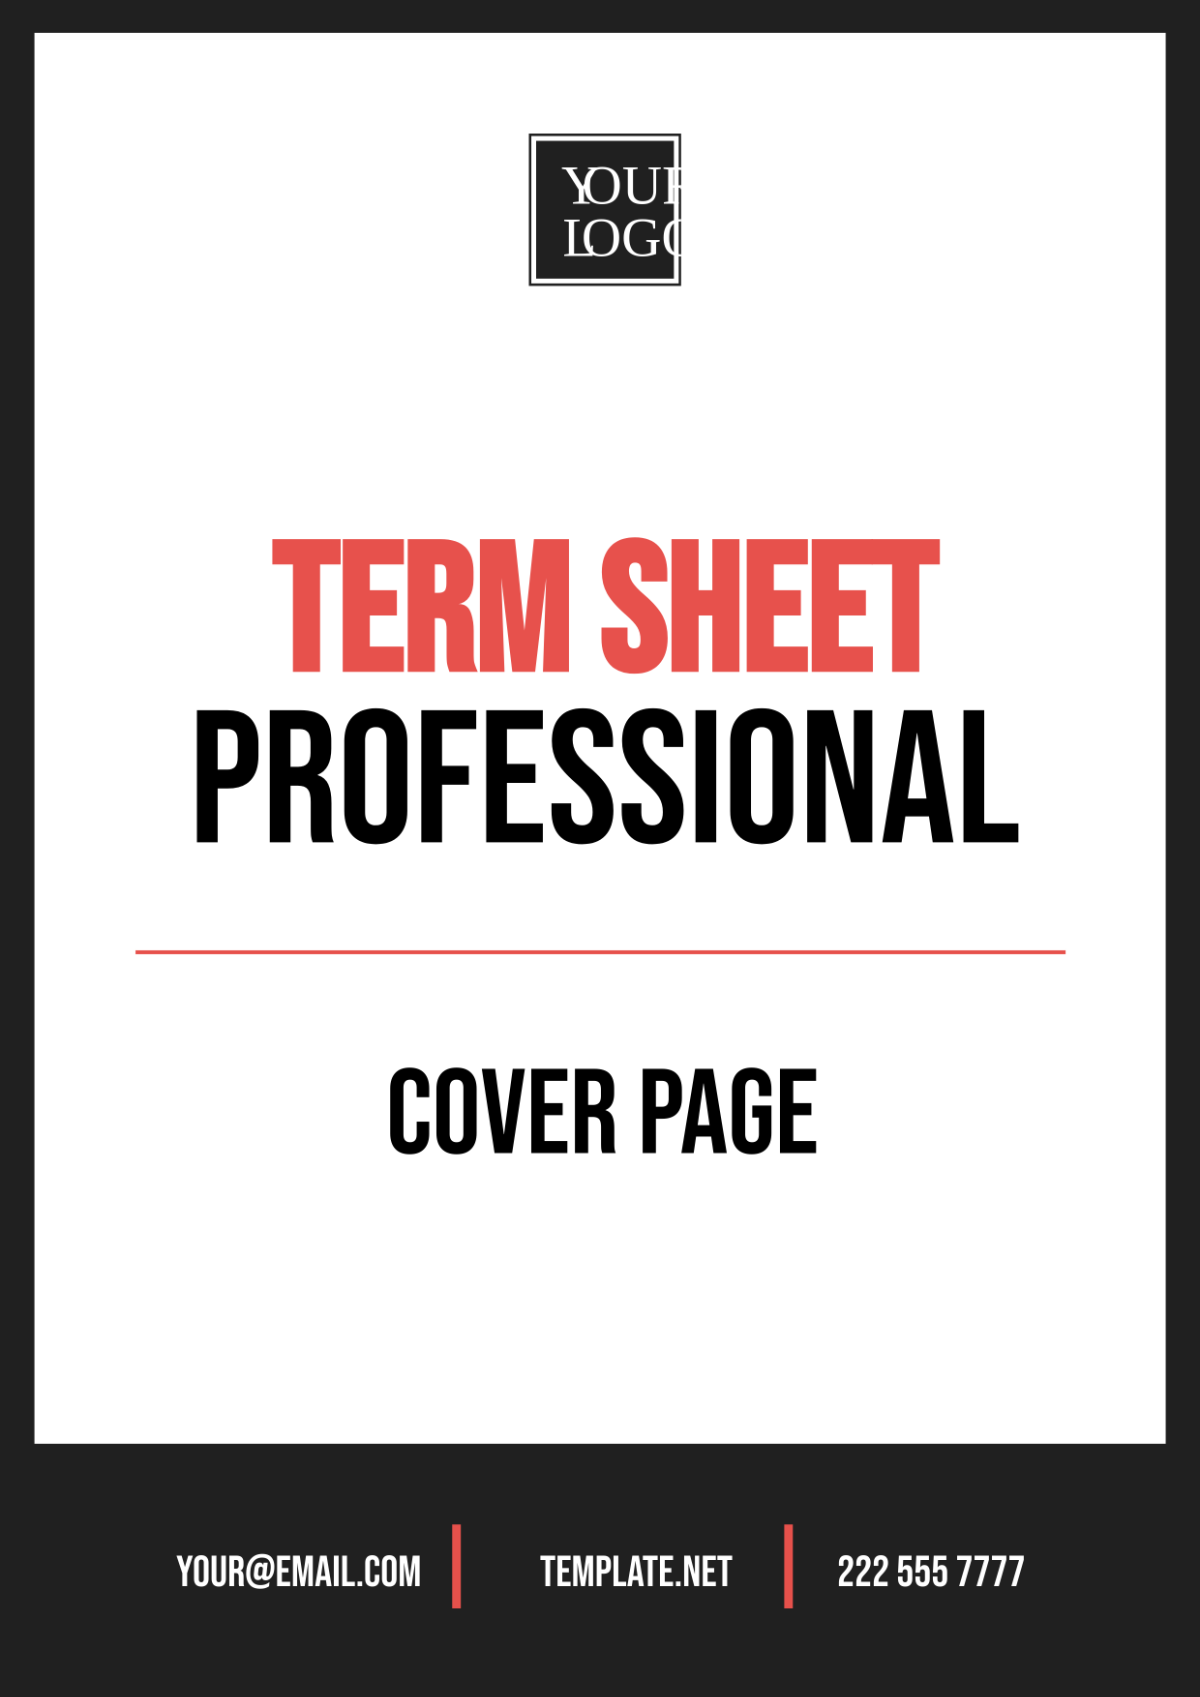 Term Sheet Professional Cover Page